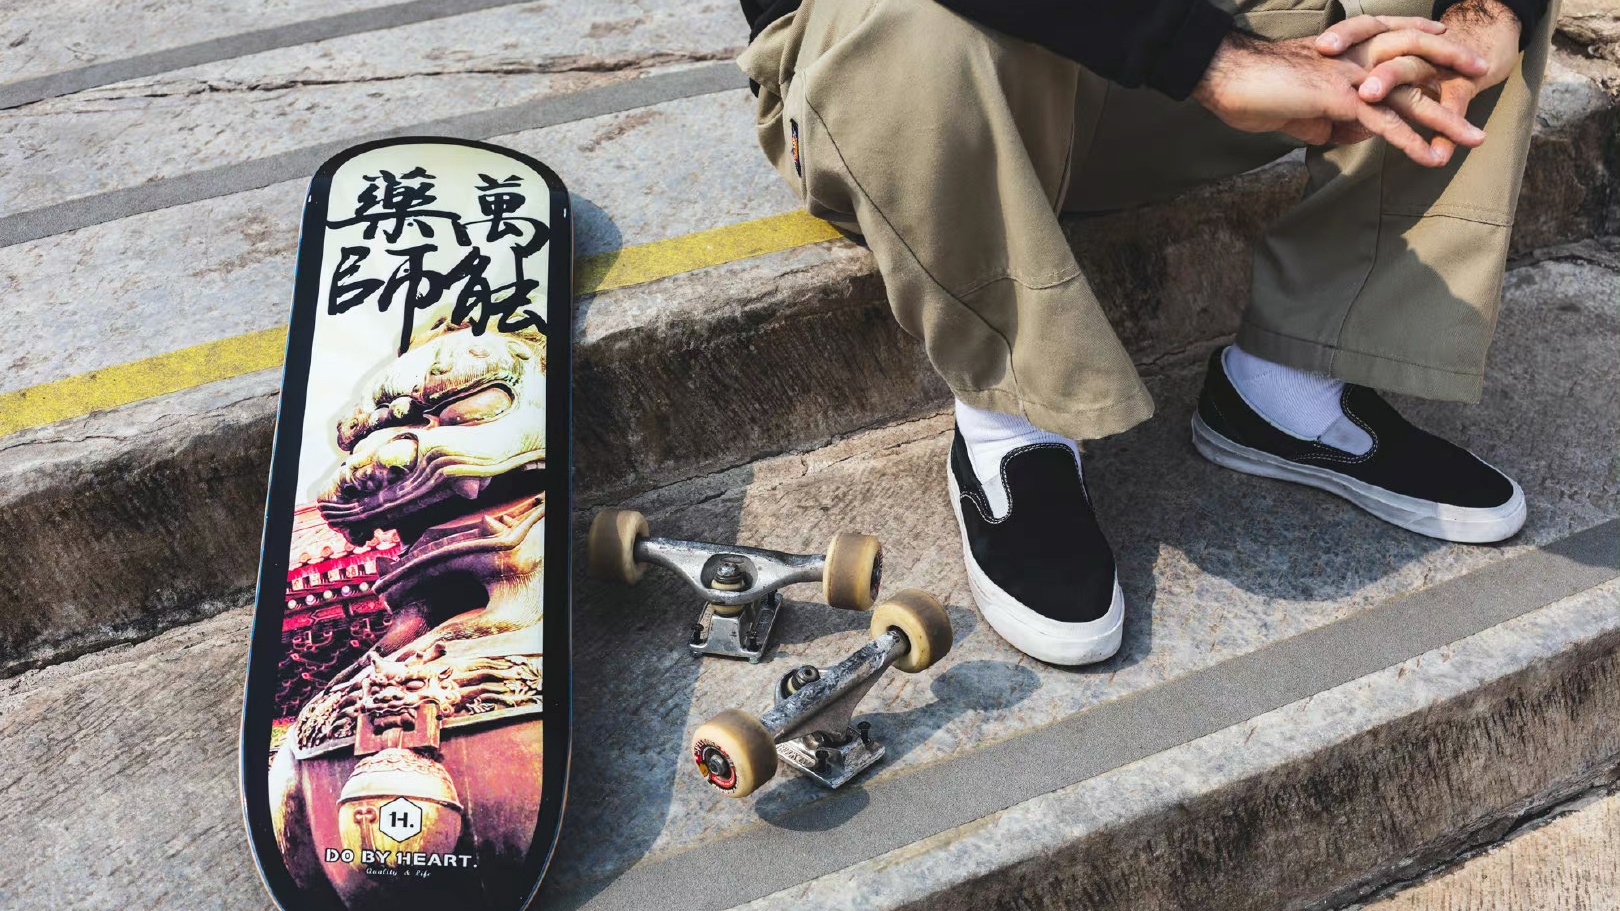 Skateboarding has been exploding in popularity in China since the Tokyo Olympics. Jing Daily explores why the sport, and culture, are becoming mainstream. Photo: DBH